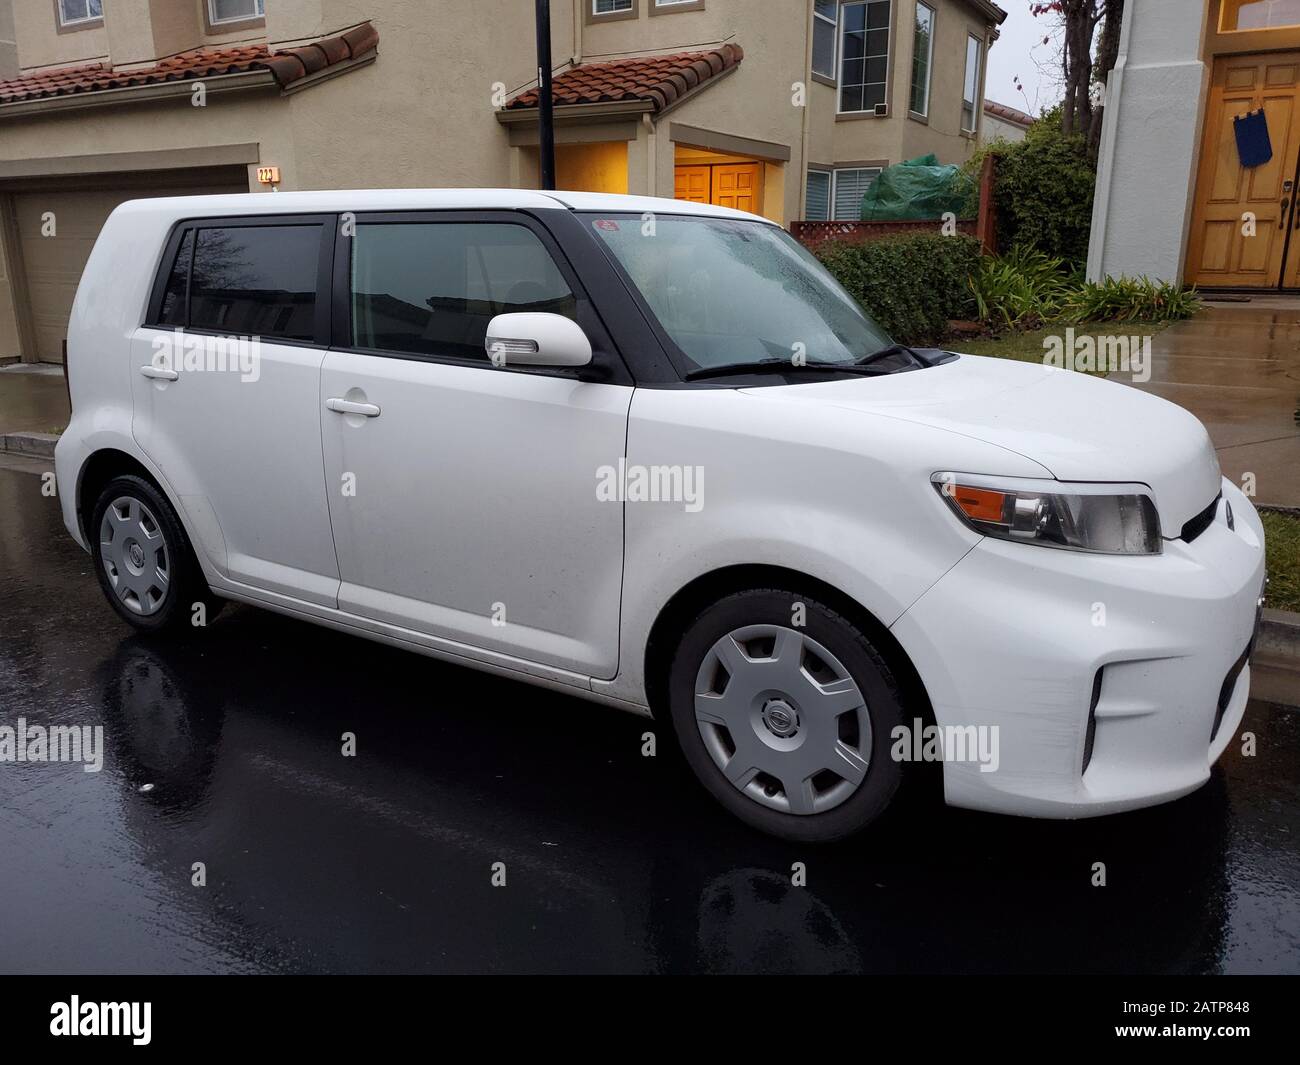 Side view of white Toyota Scion automobile in San Ramon, California, January 22, 2020. The Scion was discontinued by Toyota in 2016. () Stock Photo